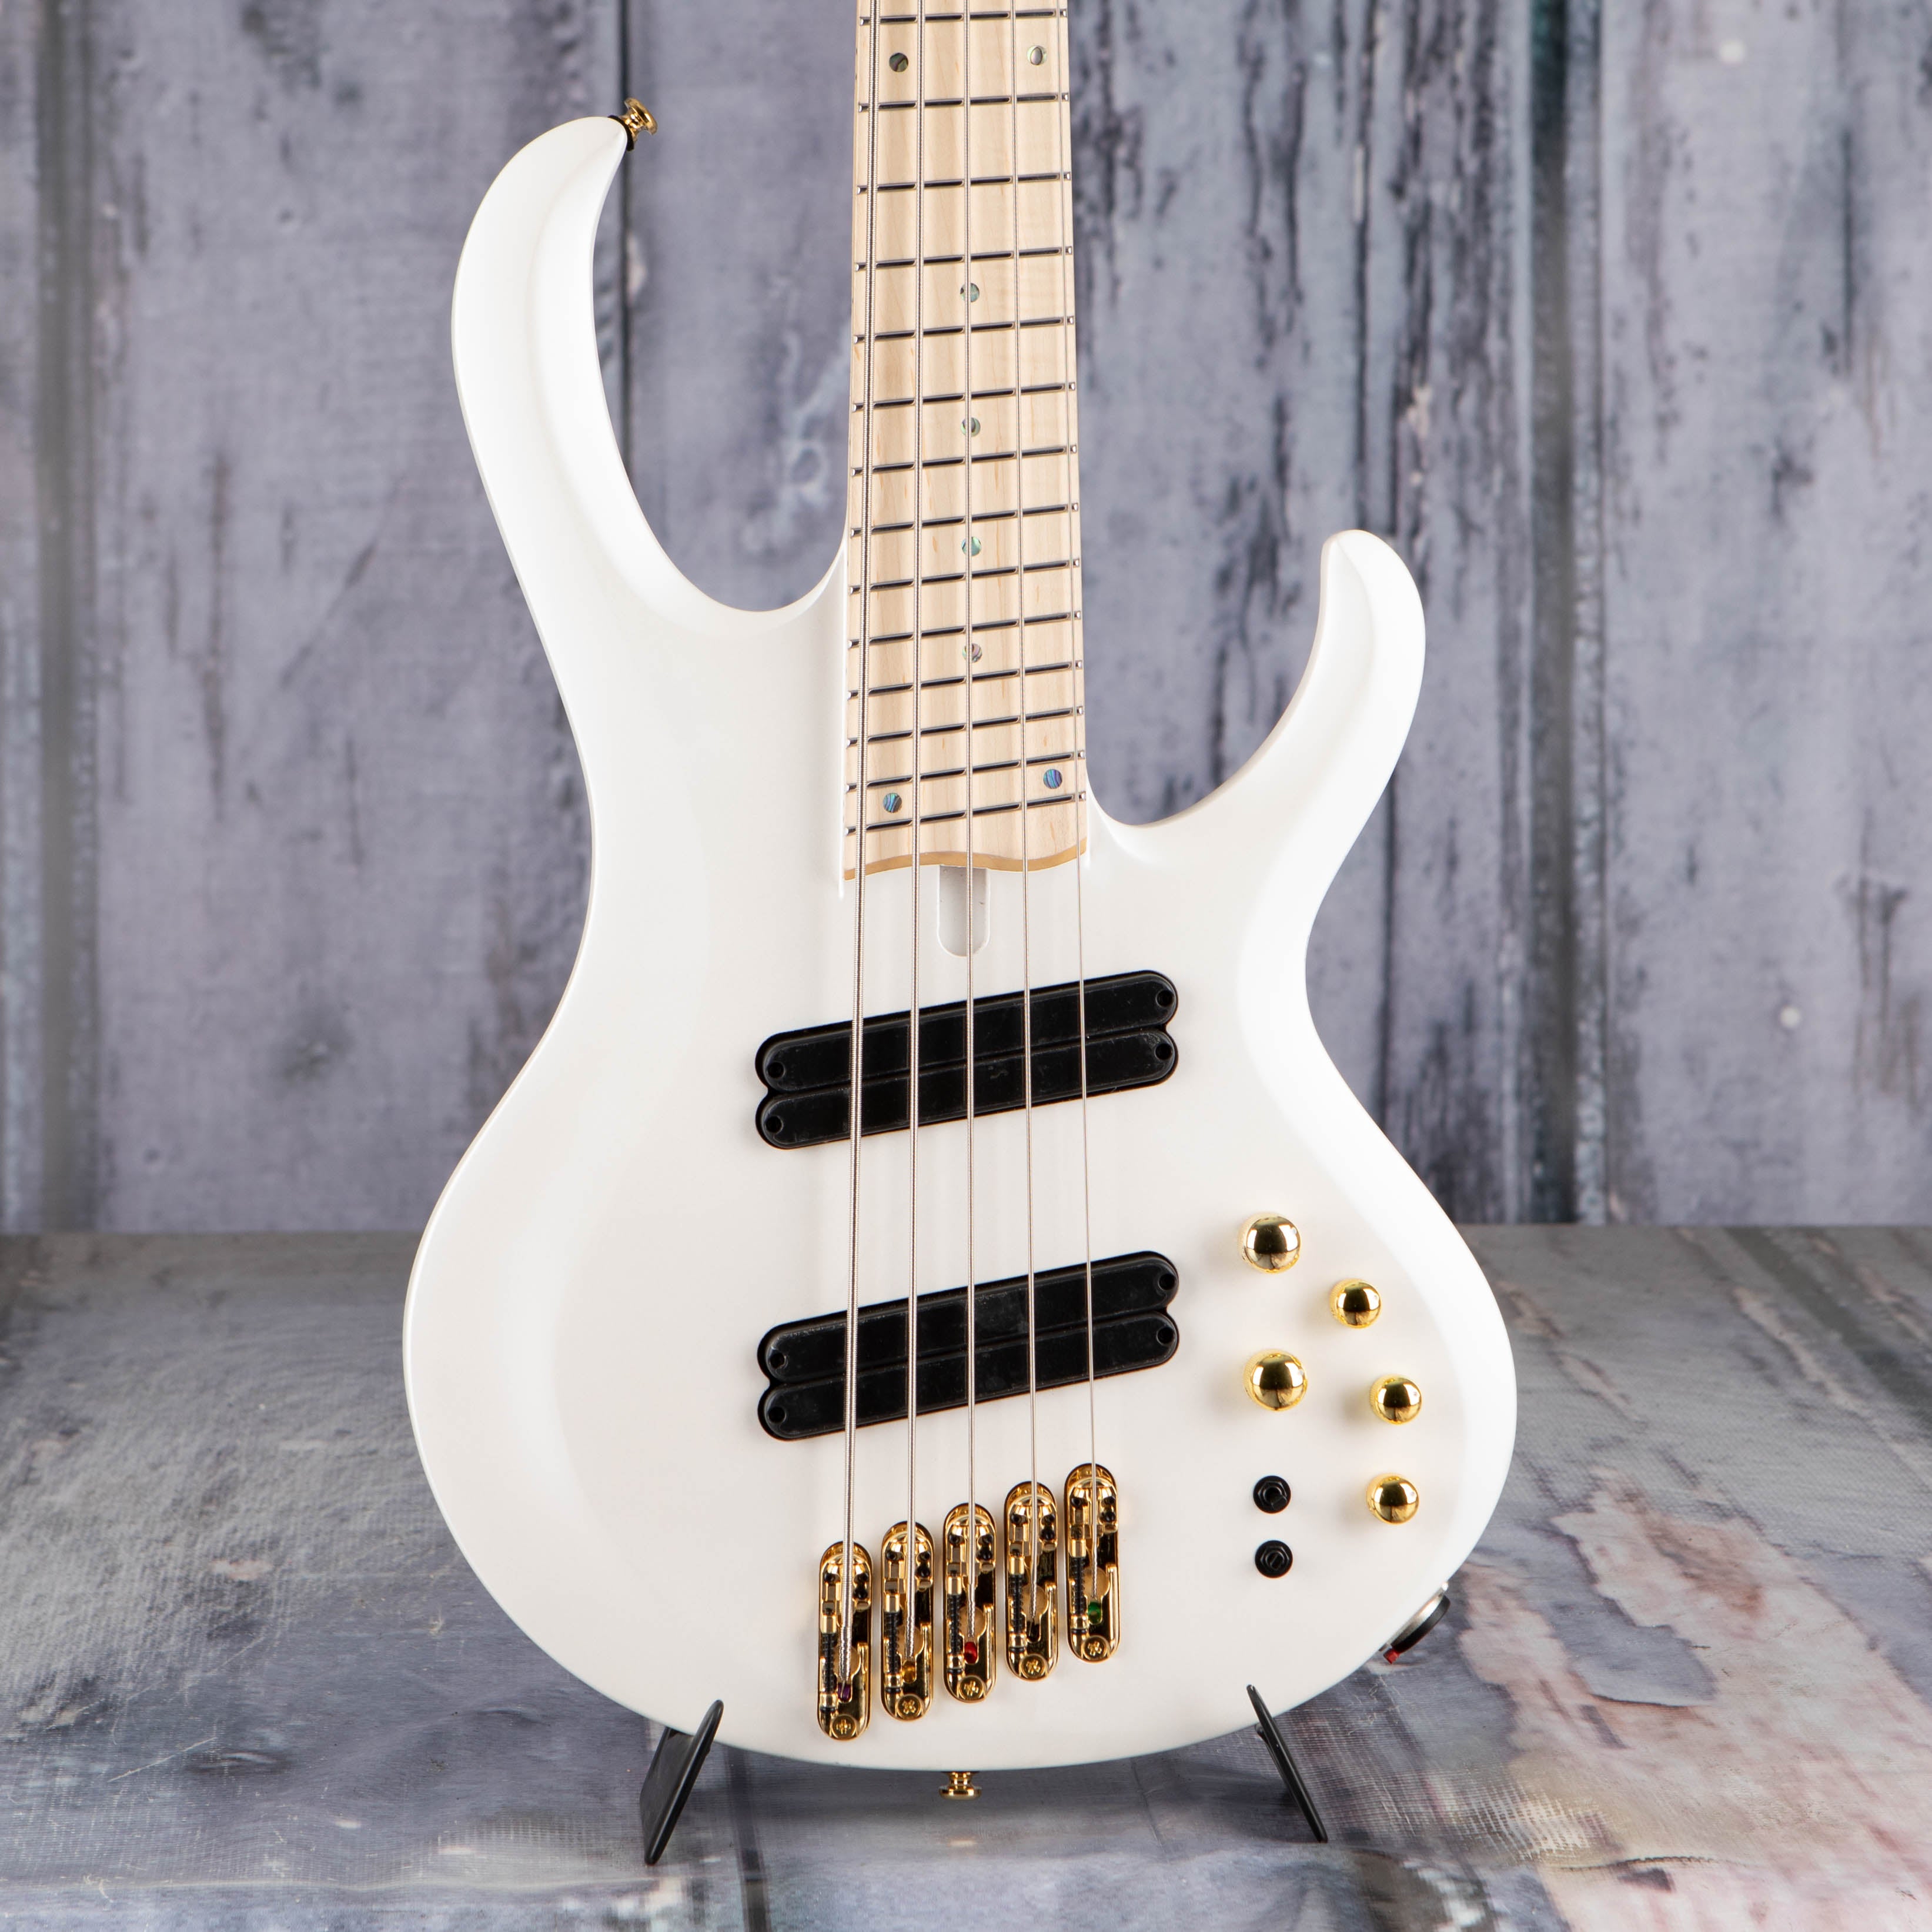 Ibanez BTB605MLM Bass Workshop Multi-Scale 5-String Electric Bass Guitar, Pearl White Matte, front closeup